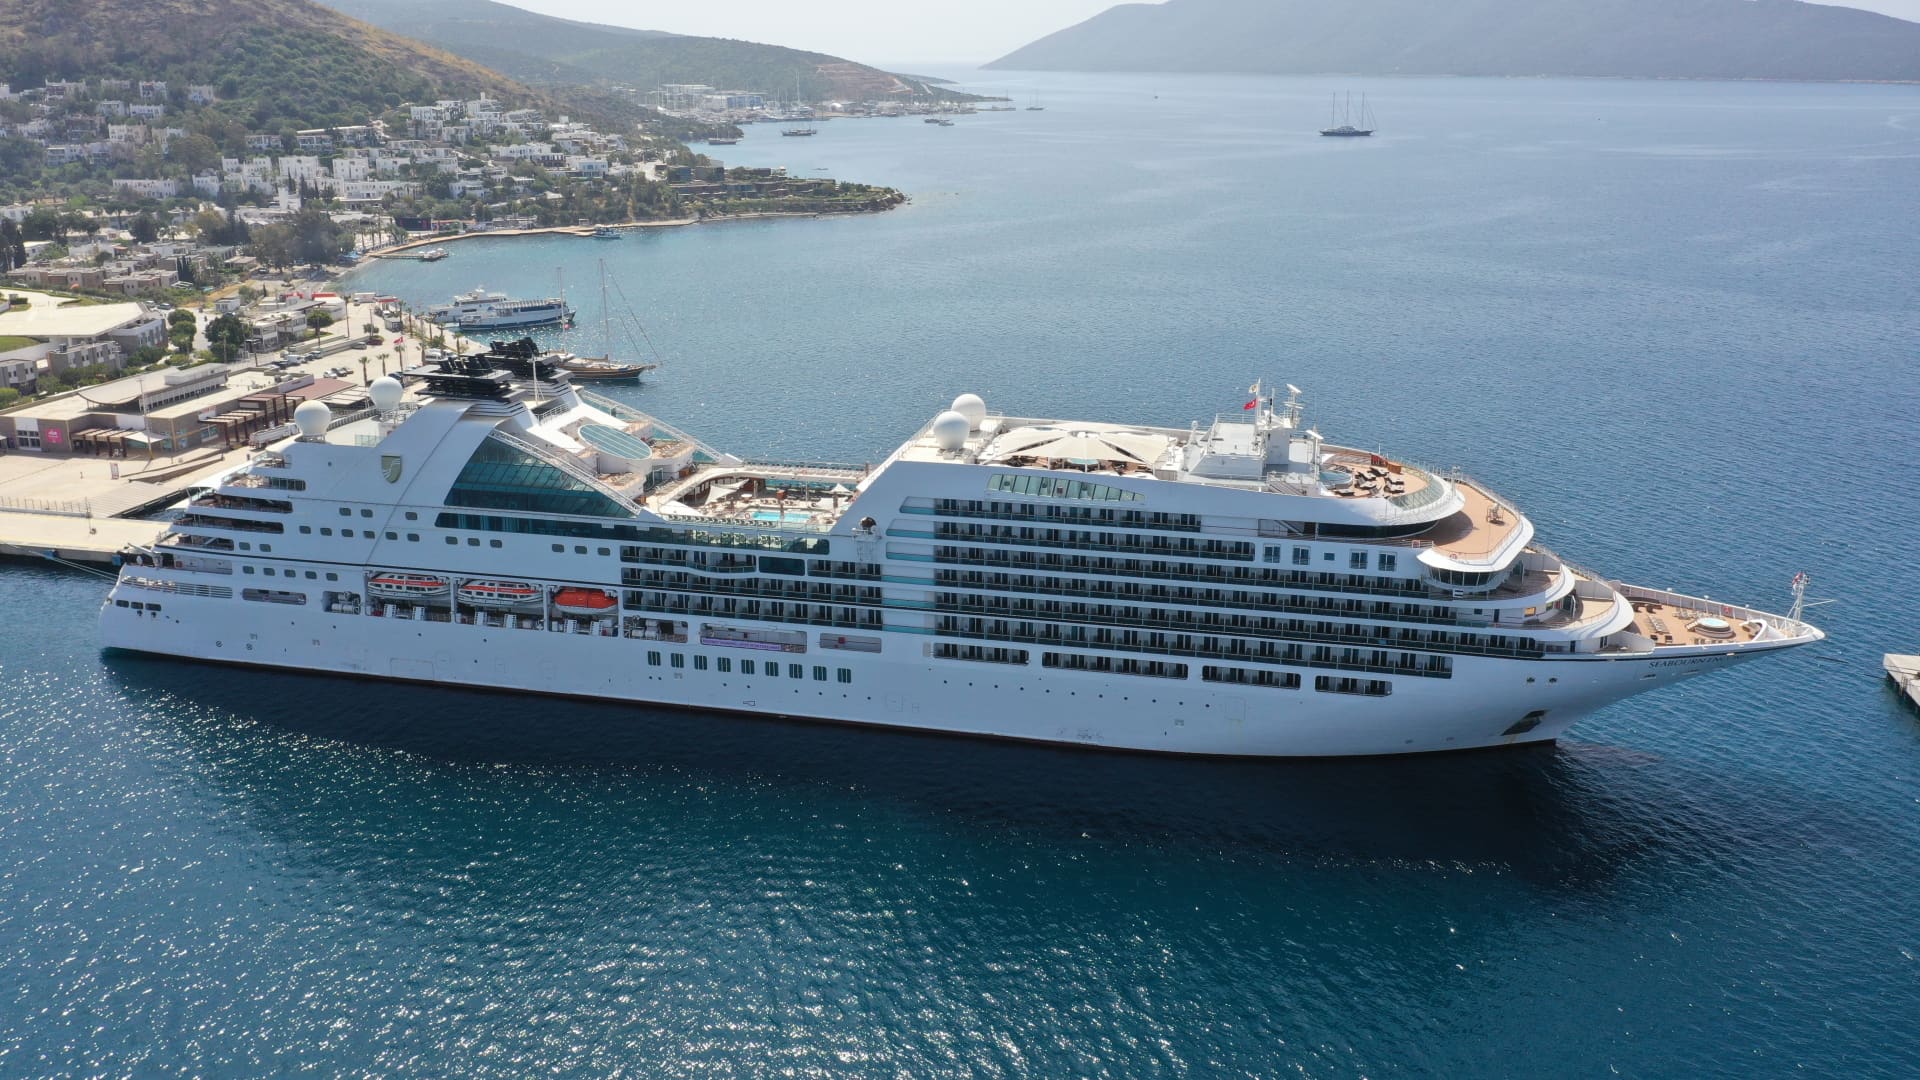 Saudi fund in early talks to potentially buy Carnival’s ultra-luxury Seabourn brand